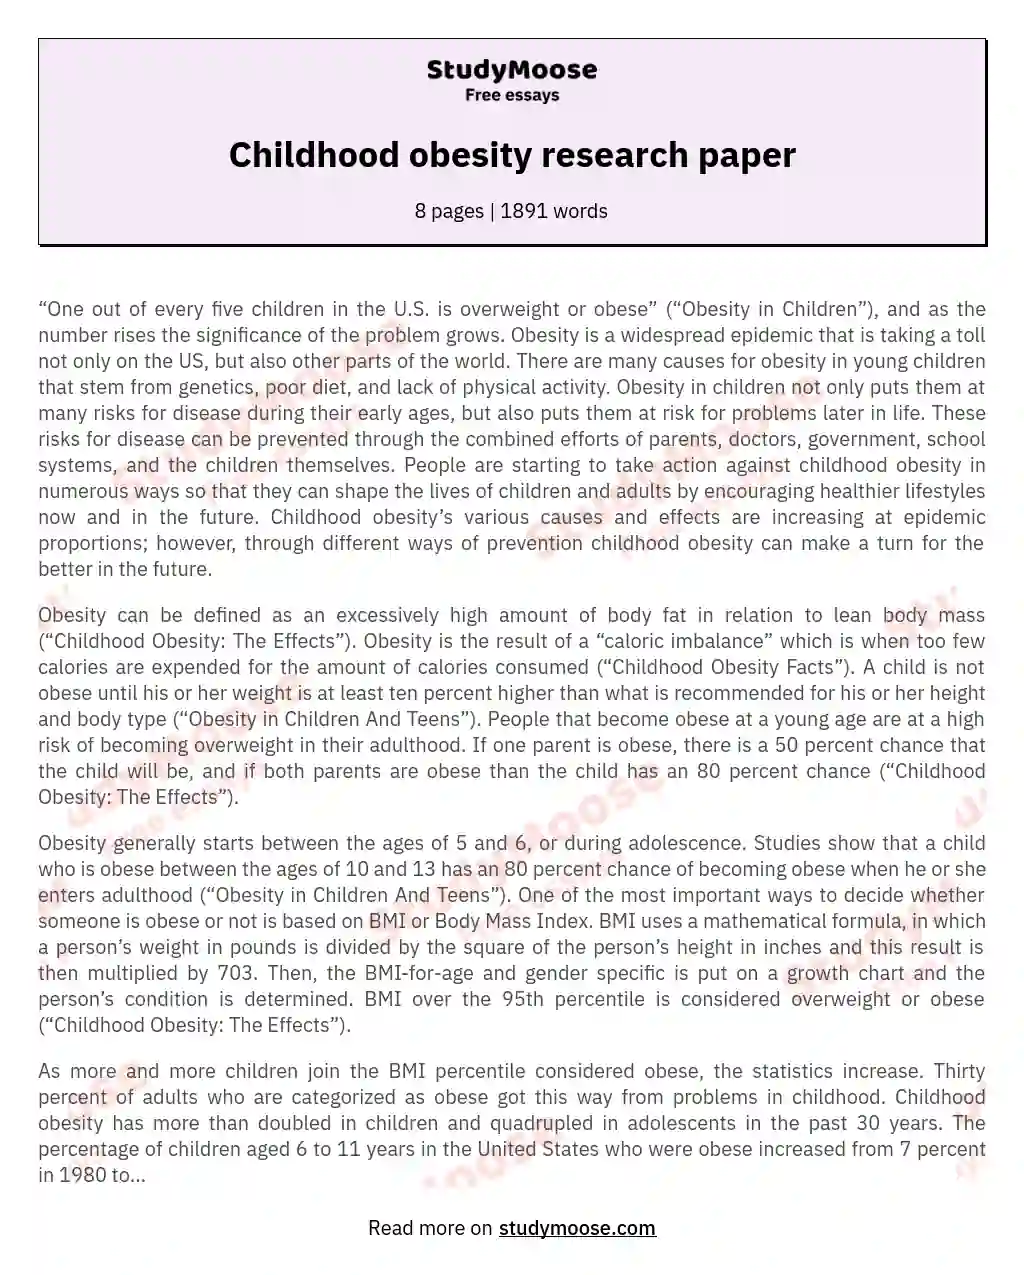 Childhood obesity research paper essay